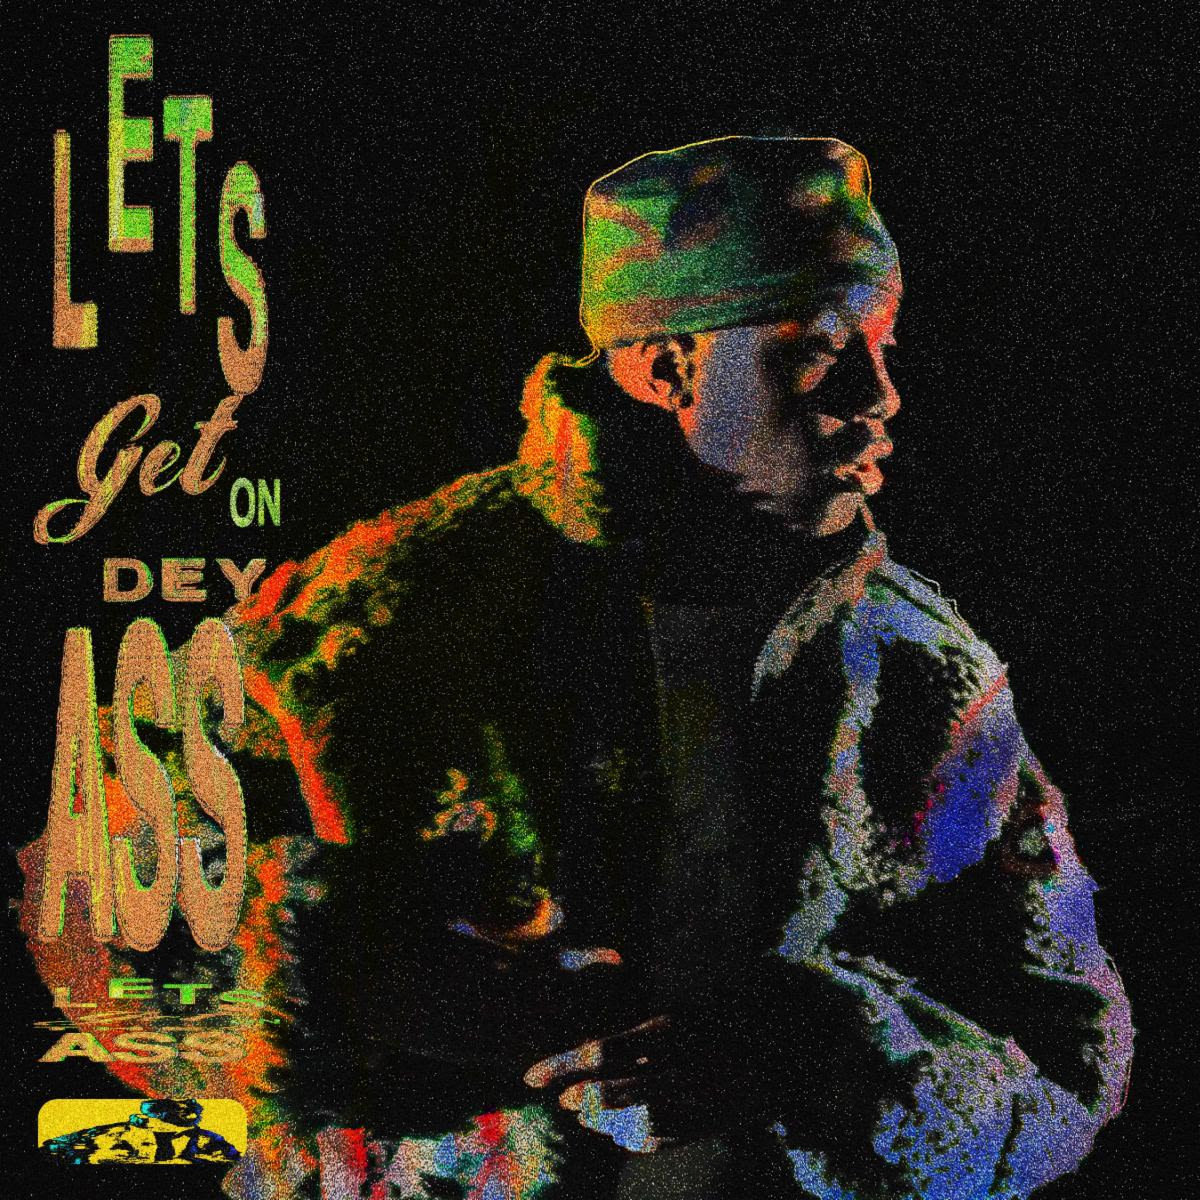 The Source |Lil Yachty Drops New Single, Visuals For "Let's Get On Dey Ass"